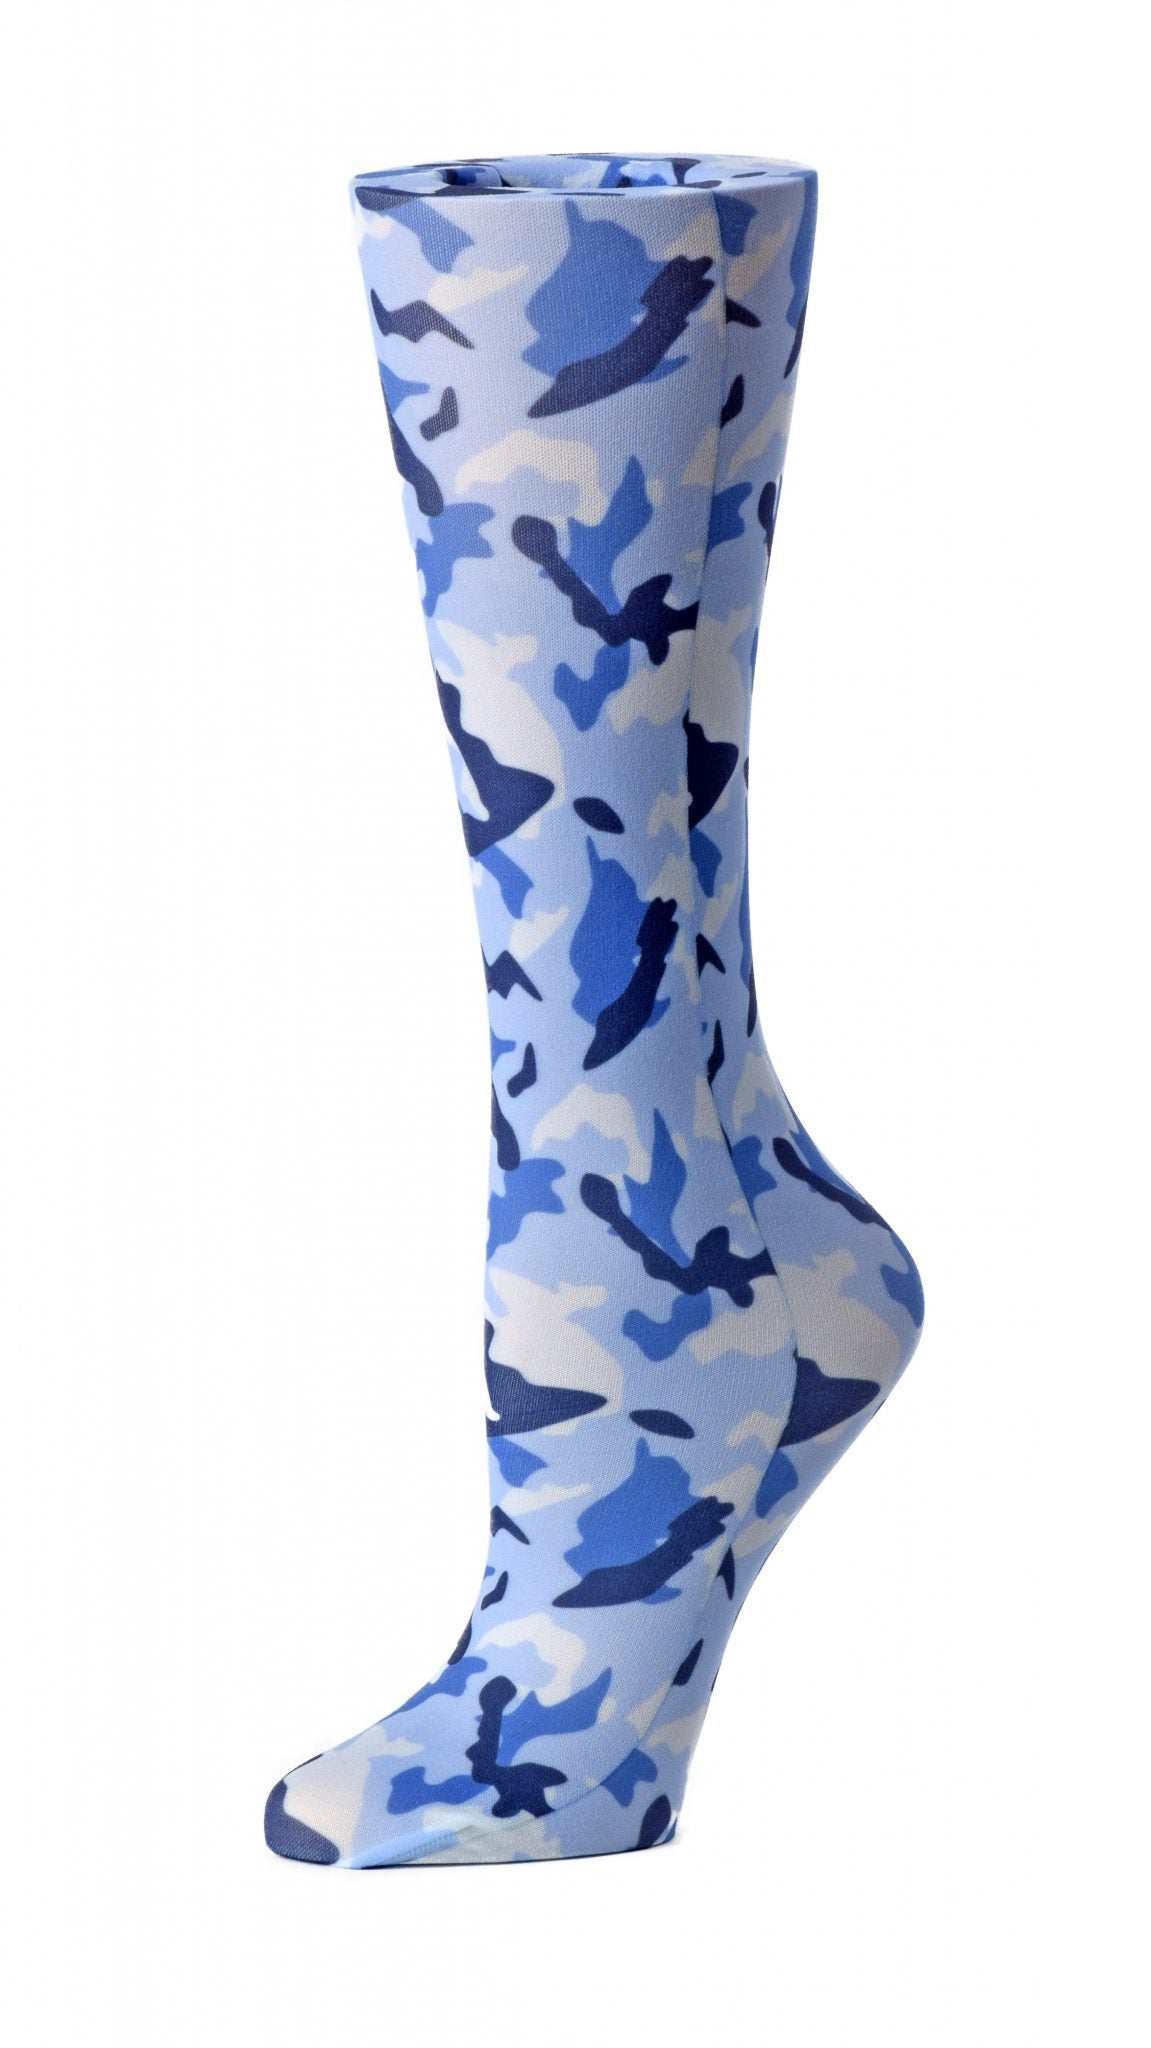 Cutieful Moderate Compression Socks 10-18 MMhg Wide Calf Knit Print Pattern Blue Camo at Parker's Clothing and Shoes.